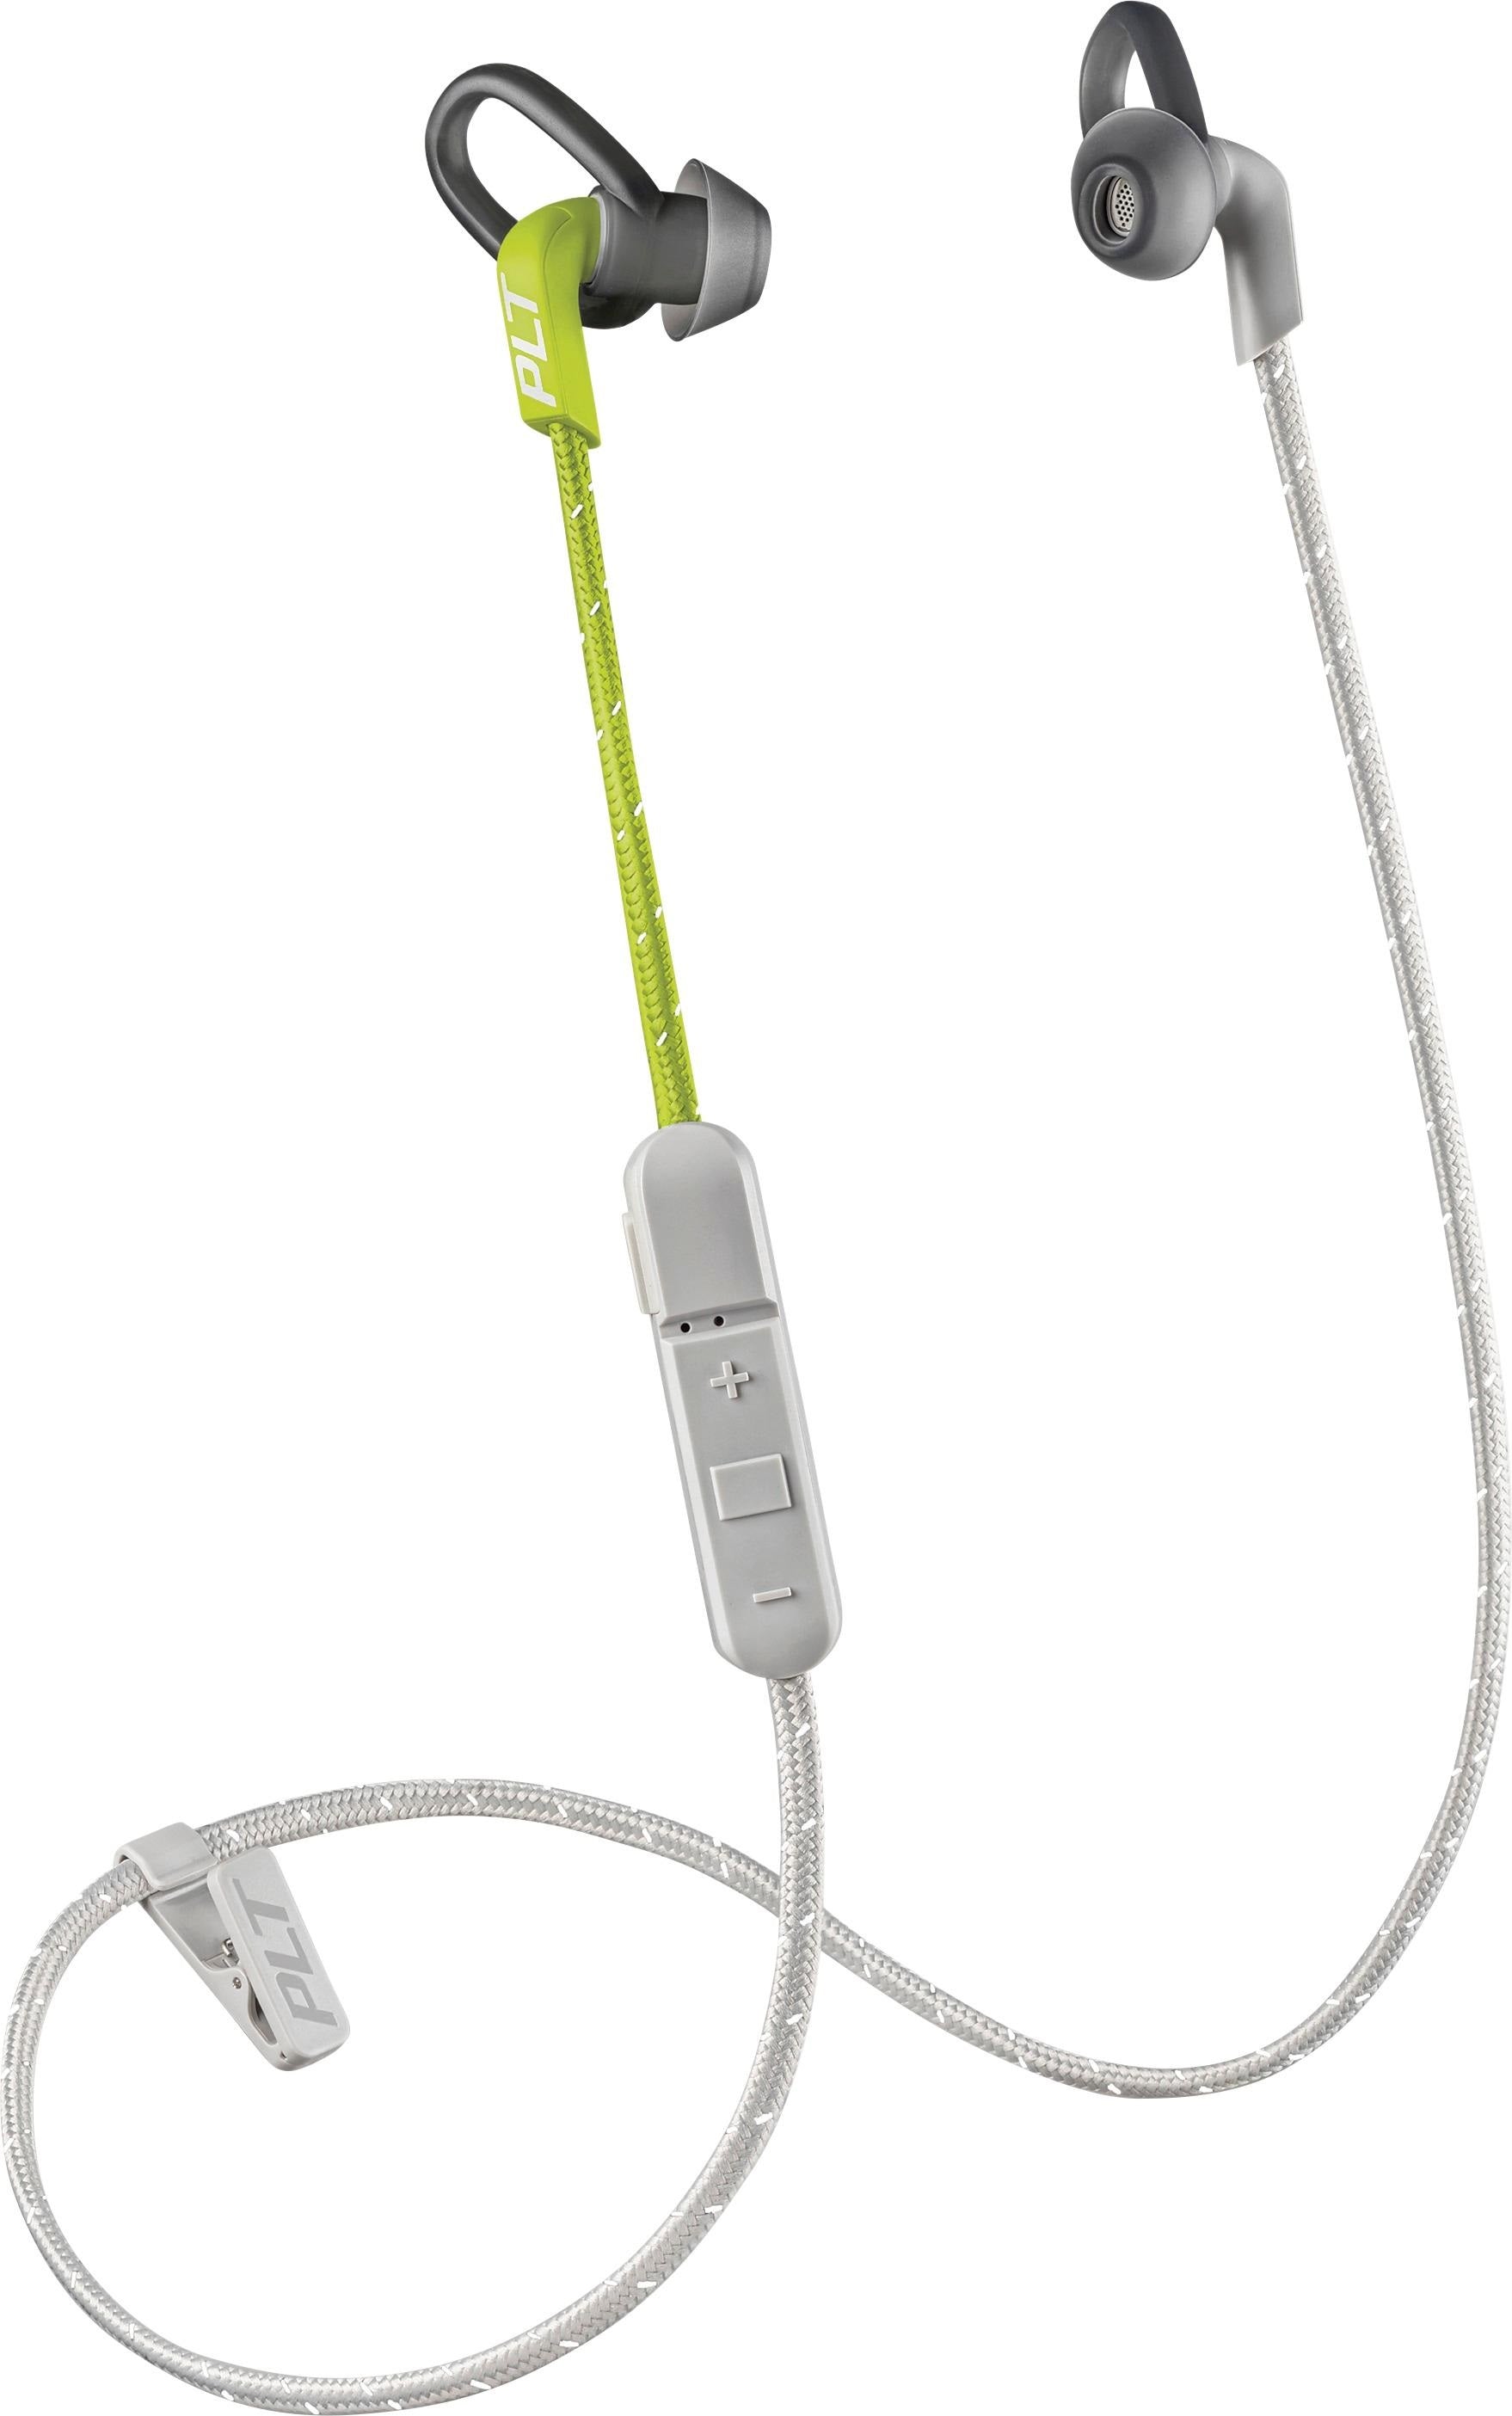 Plantronics BackBeat FIT 305 Wireless Headset for Mobile